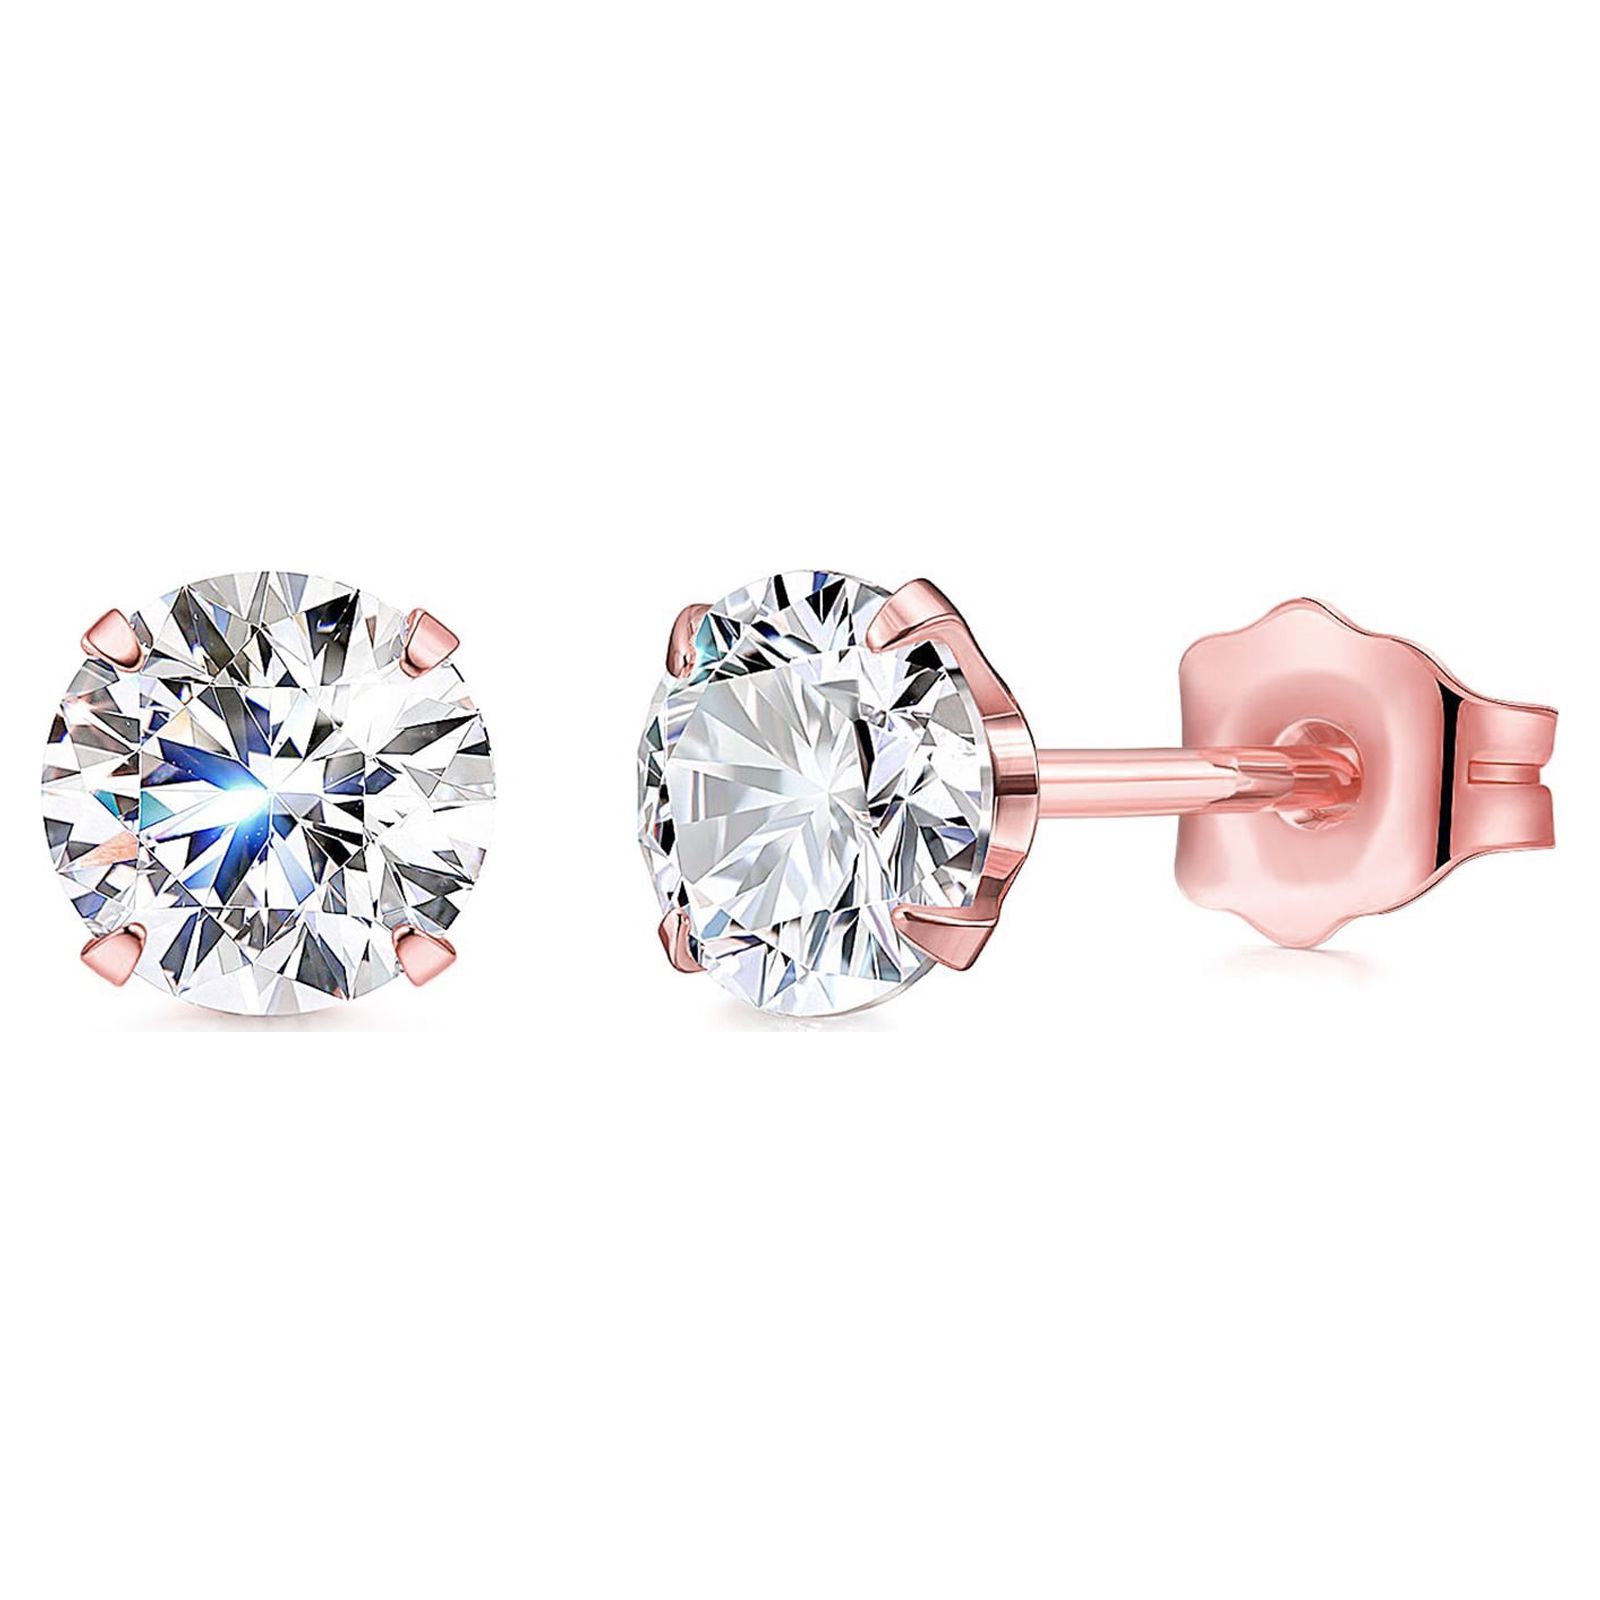 10K Rose Gold Earrings for Women Created White Sapphire Round Stud Earrings Plated for Women (8mm) - image 1 of 9